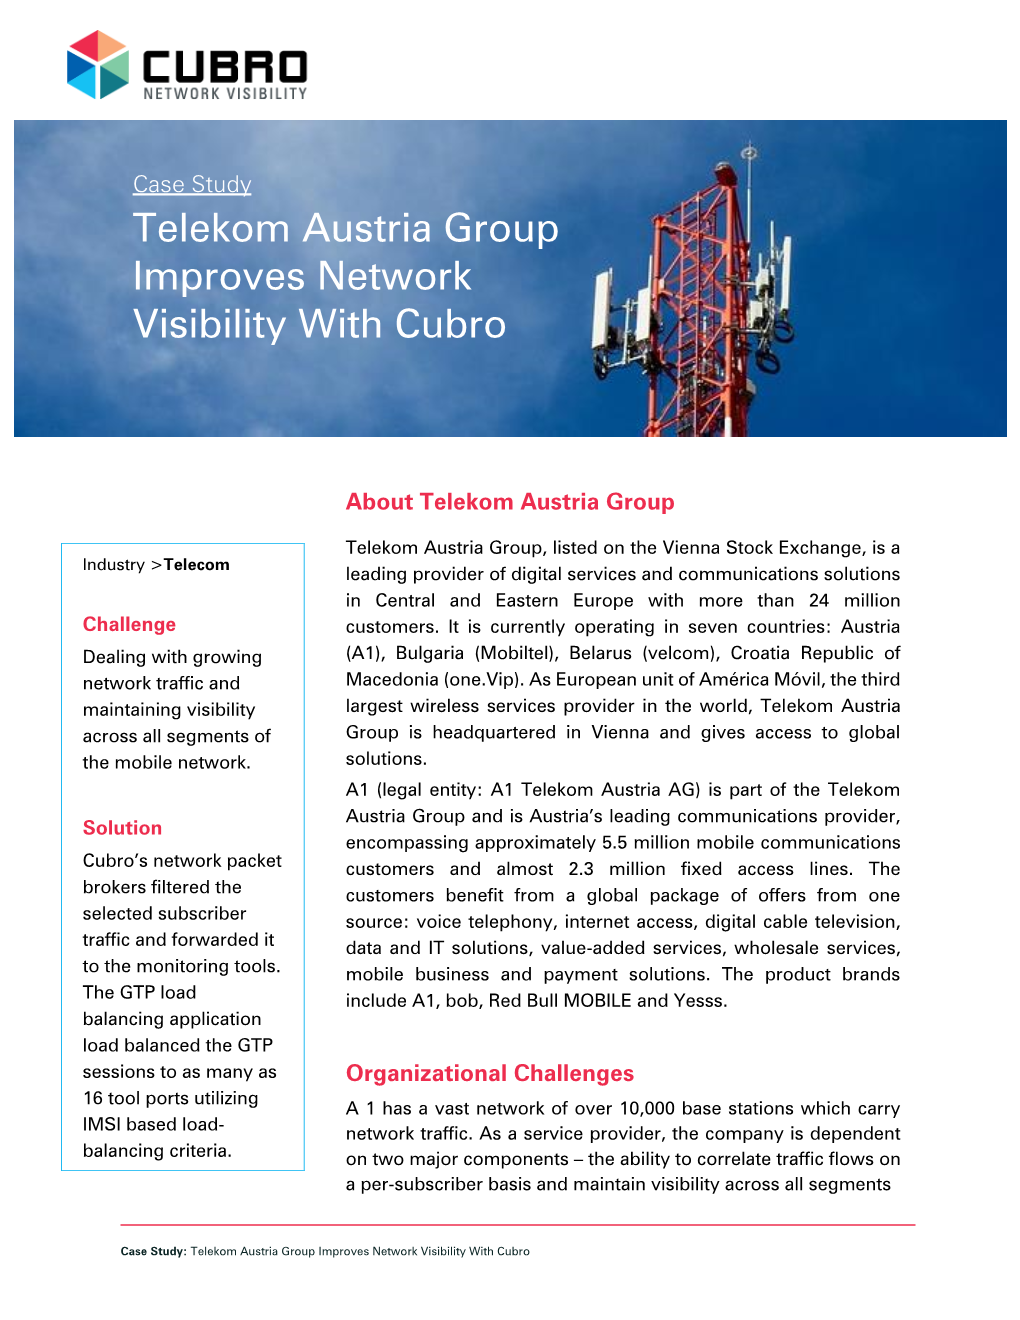 Telekom Austria Group Improves Network Visibility with Cubro